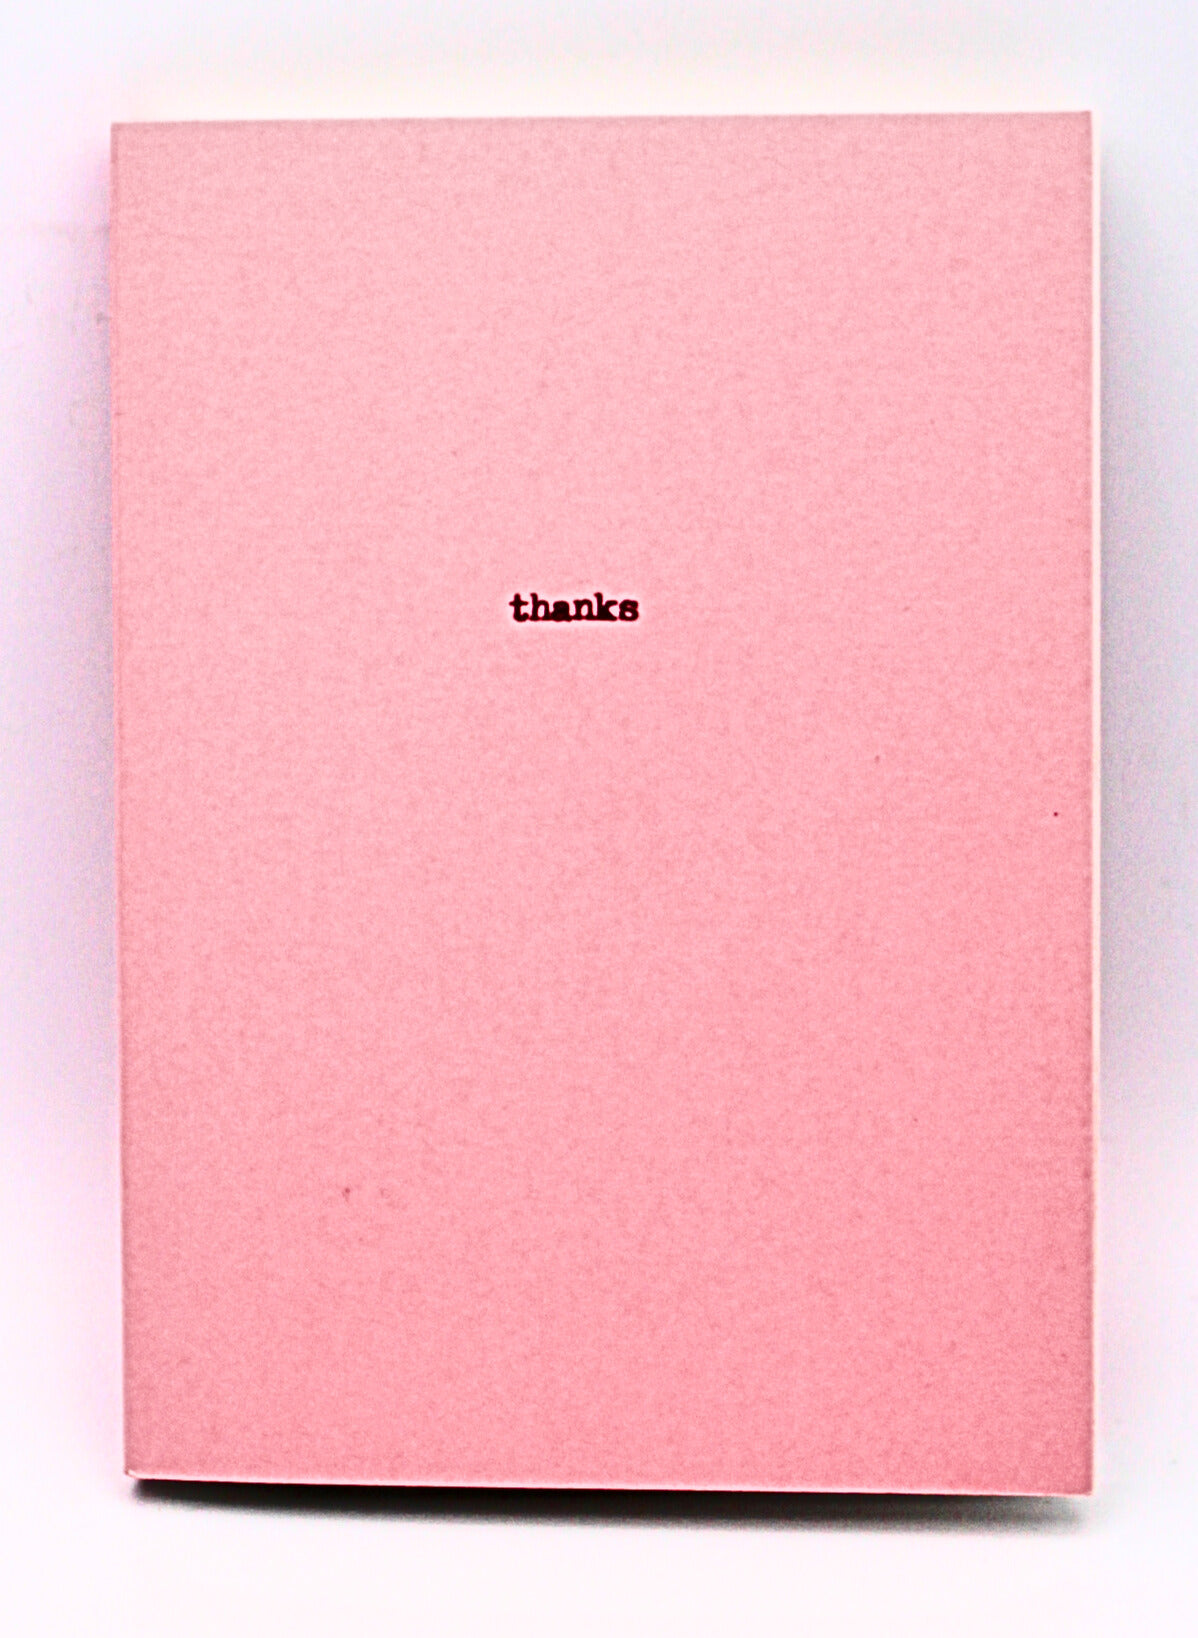 Badly Made Notebook - A6 Blank Notebook in Pink